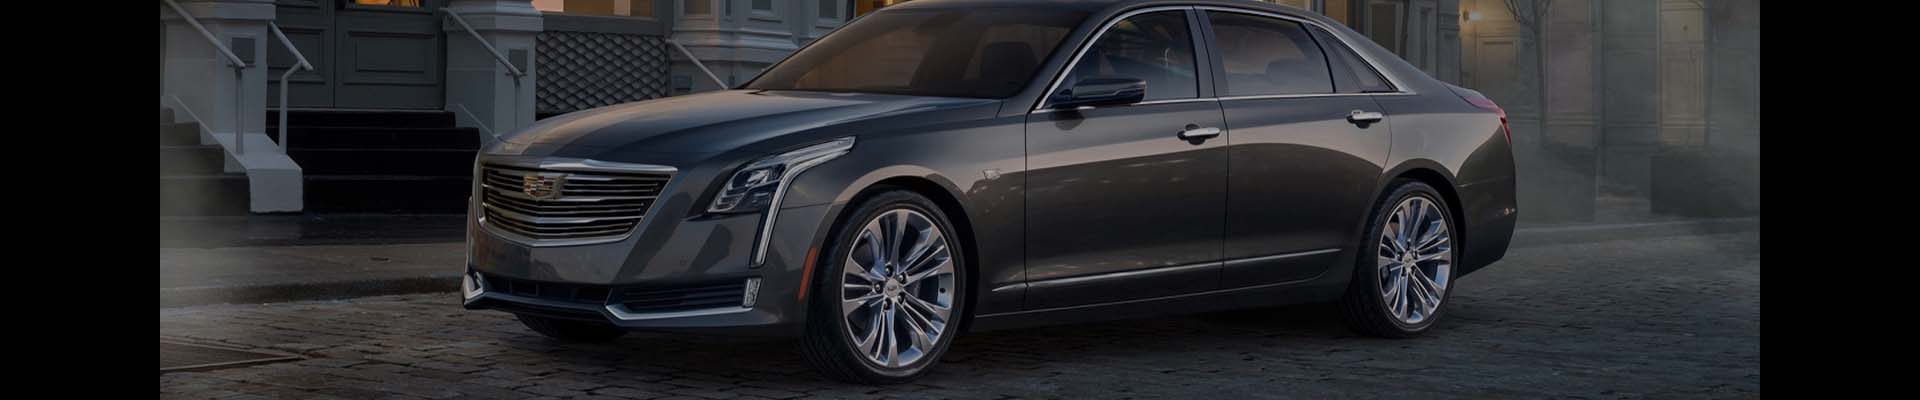 Shop Replacement and OEM Cadillac Parts with Discounted Price on the Net